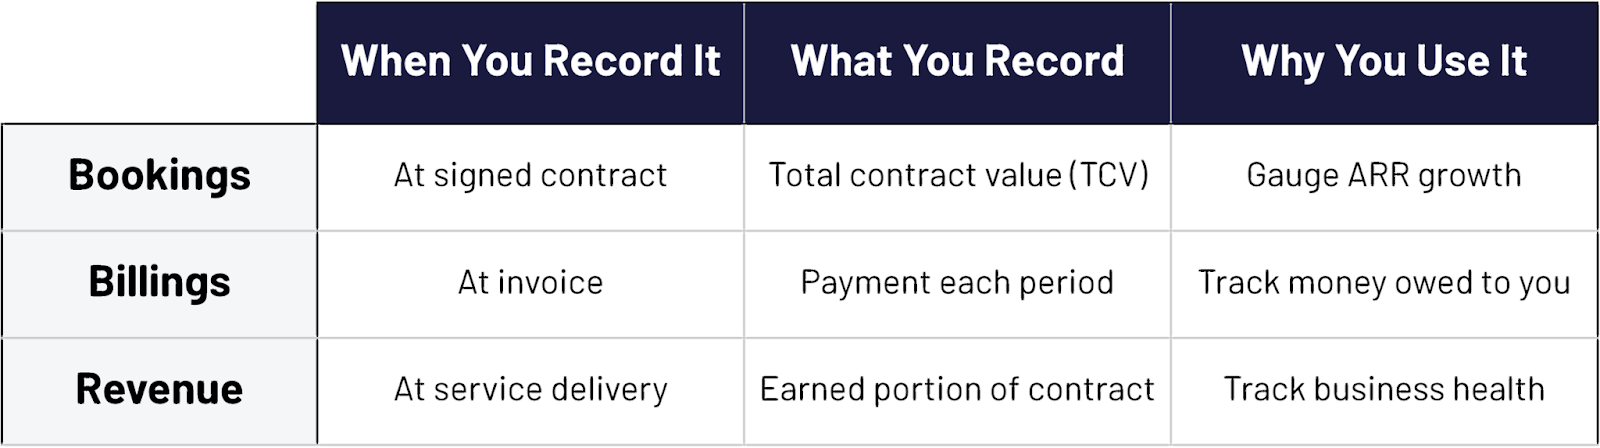 Chart comparing the key differences between bookings, billings, and revenue.